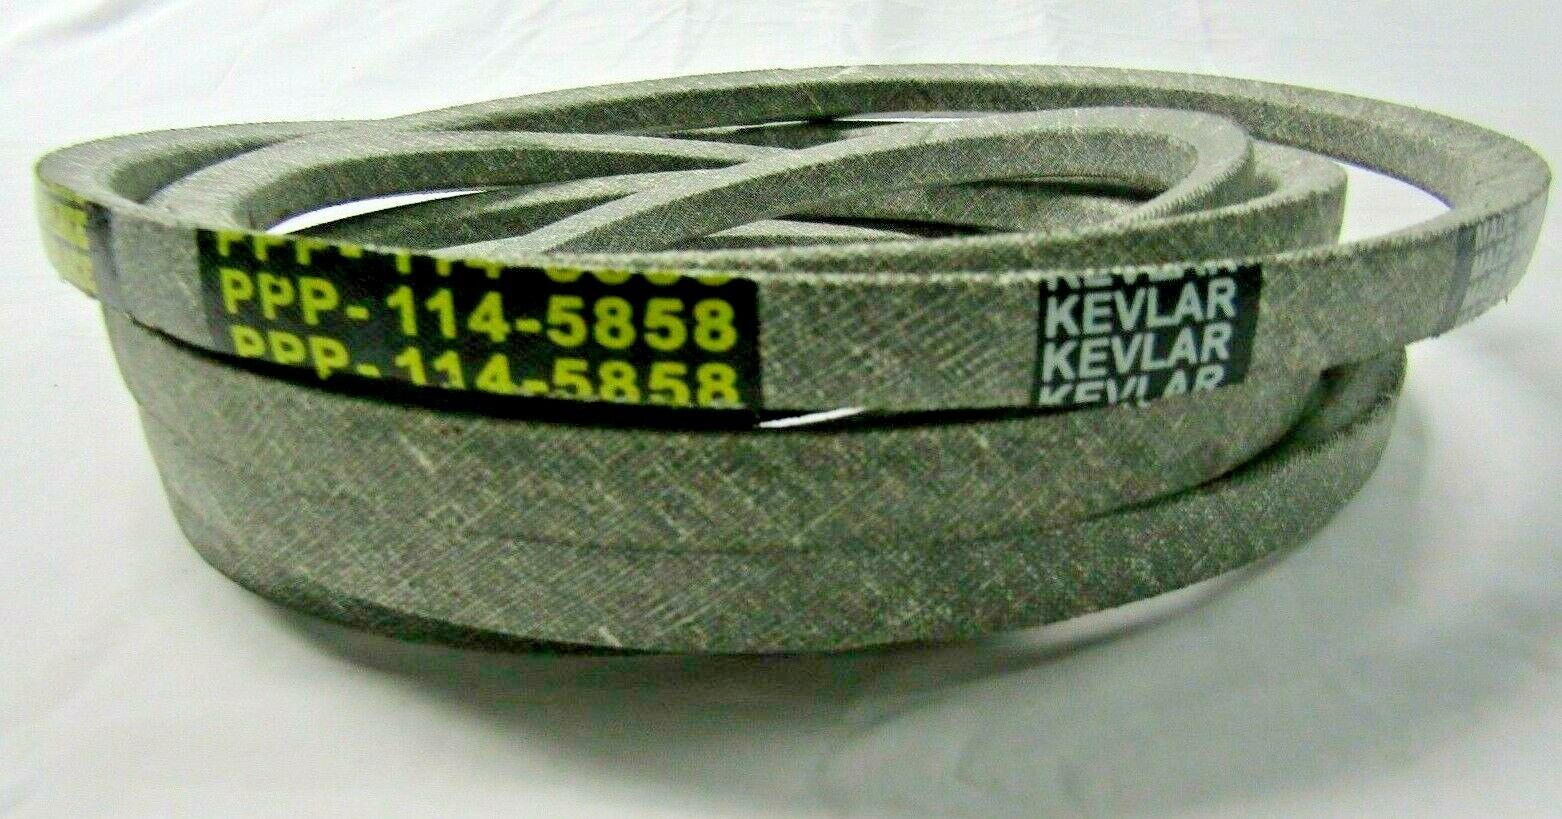 Made with Kevlar belt will fit TORO 114-5858 Z MASTER G3 74915 74925 74915 74935 - 0